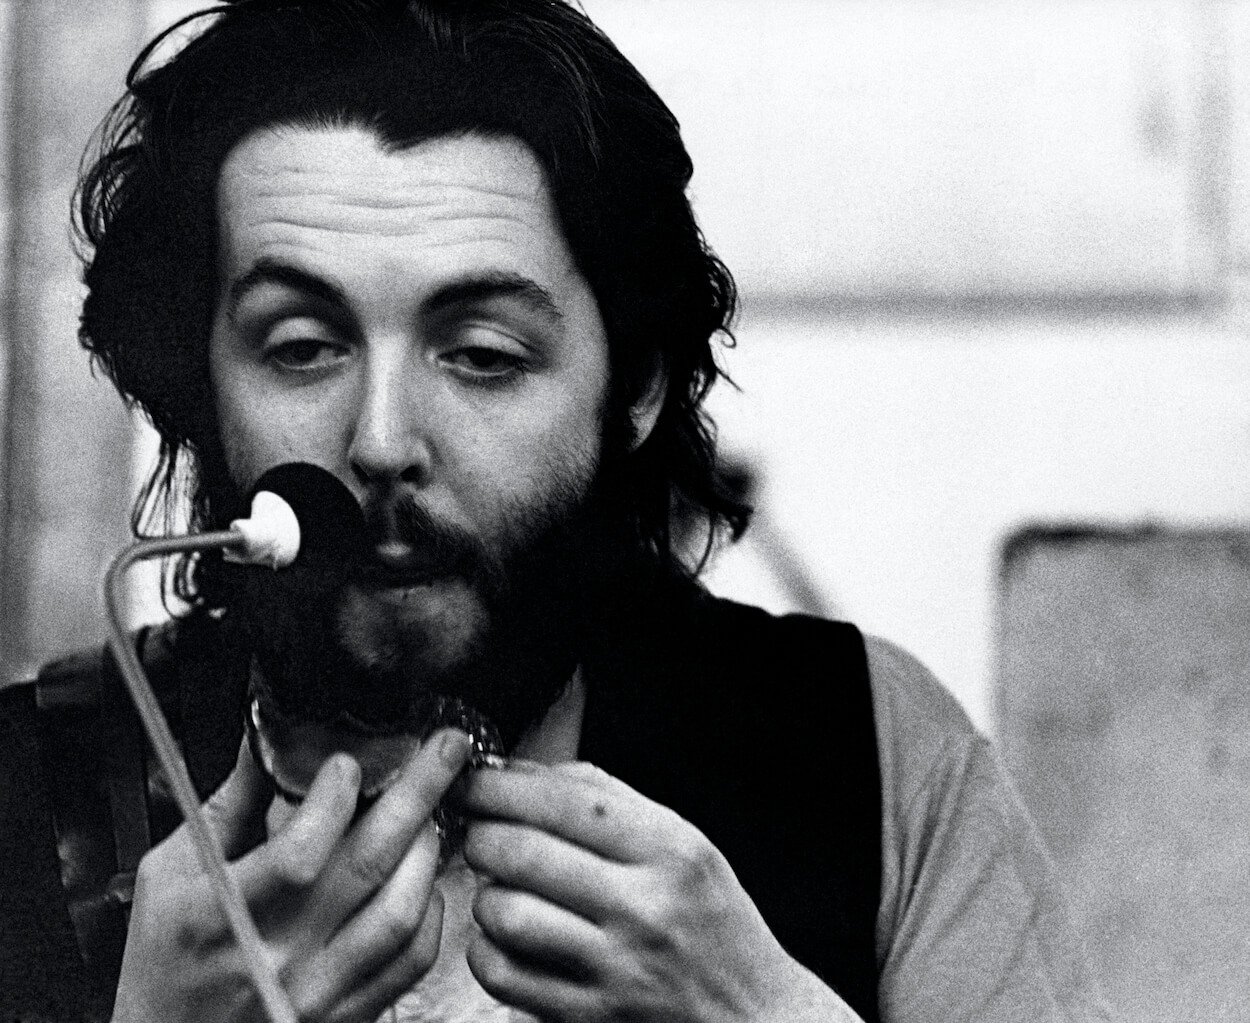 A bearded Paul McCartney wearing a dark vest over a shirt while speaking into a microphone circa 1970.